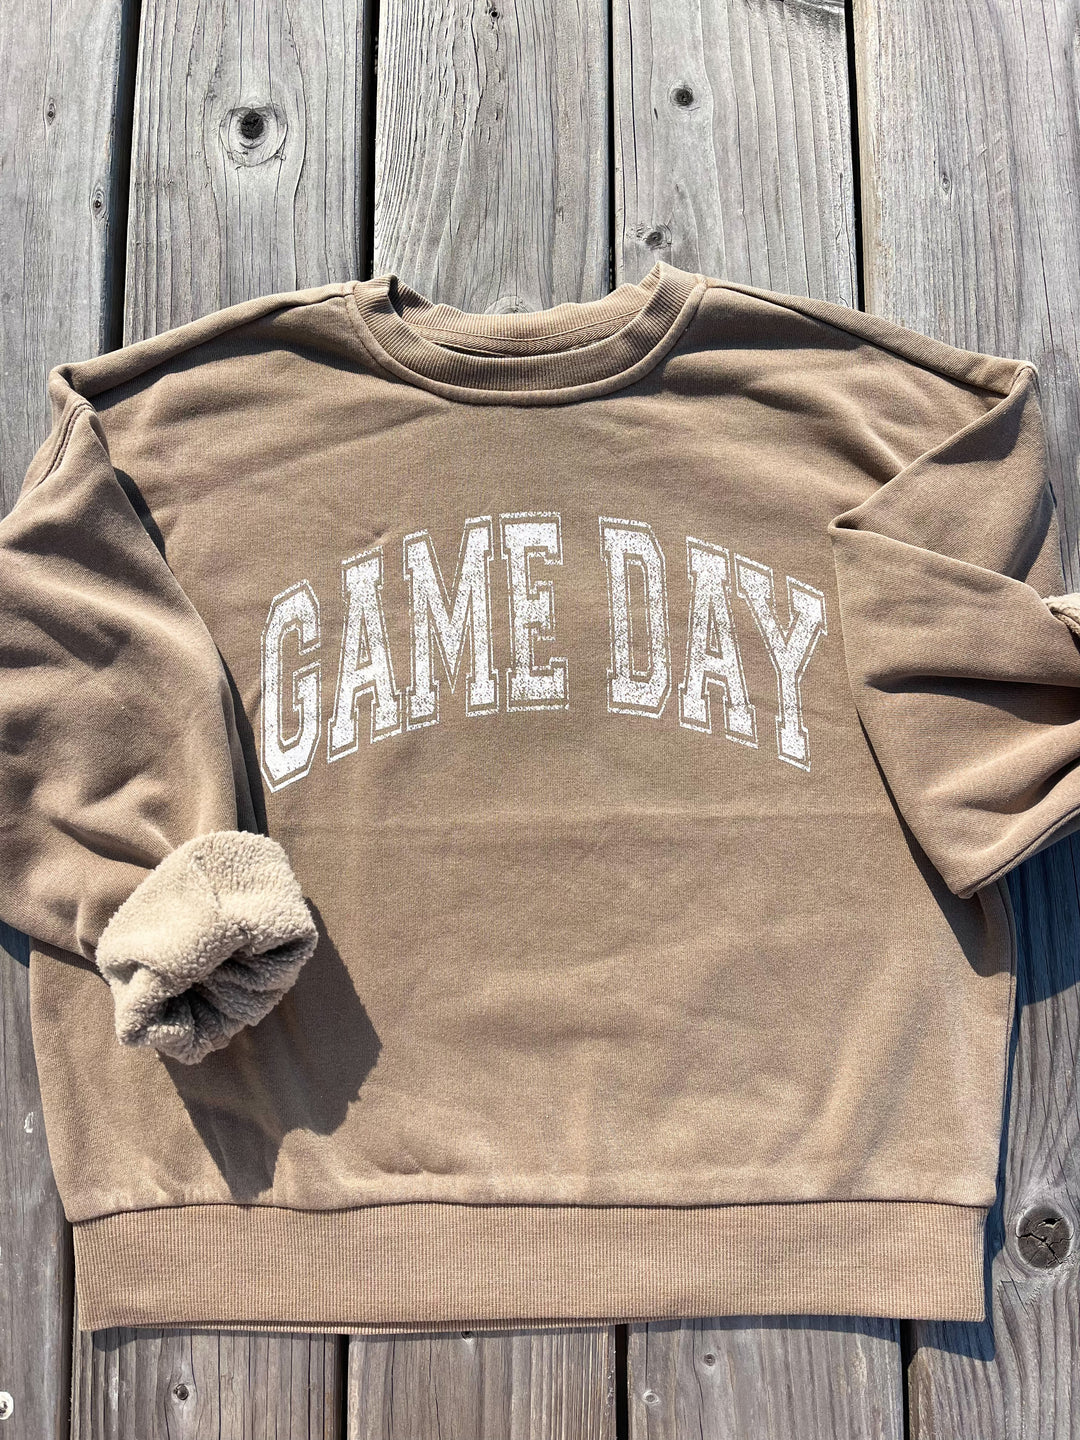 Game Day Pullover